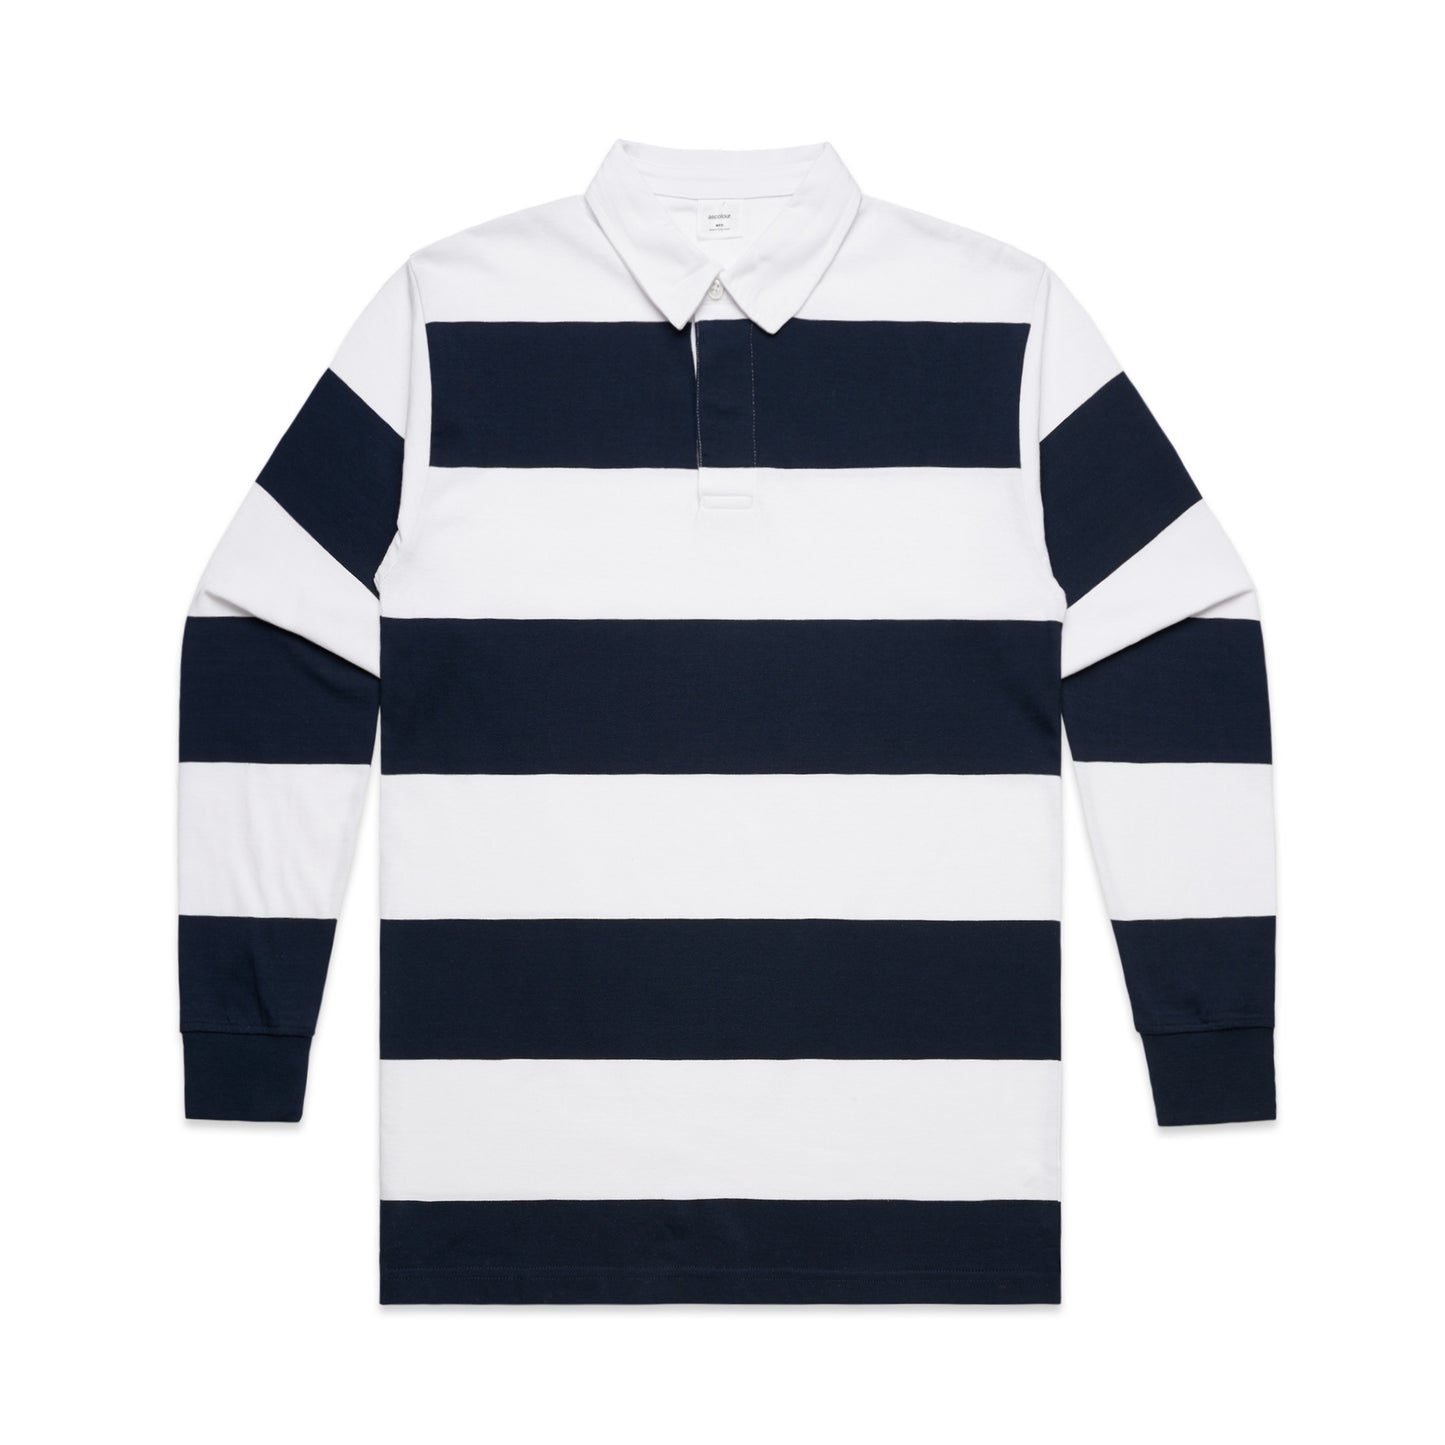 MENS RUGBY STRIPE JERSEY - 5416